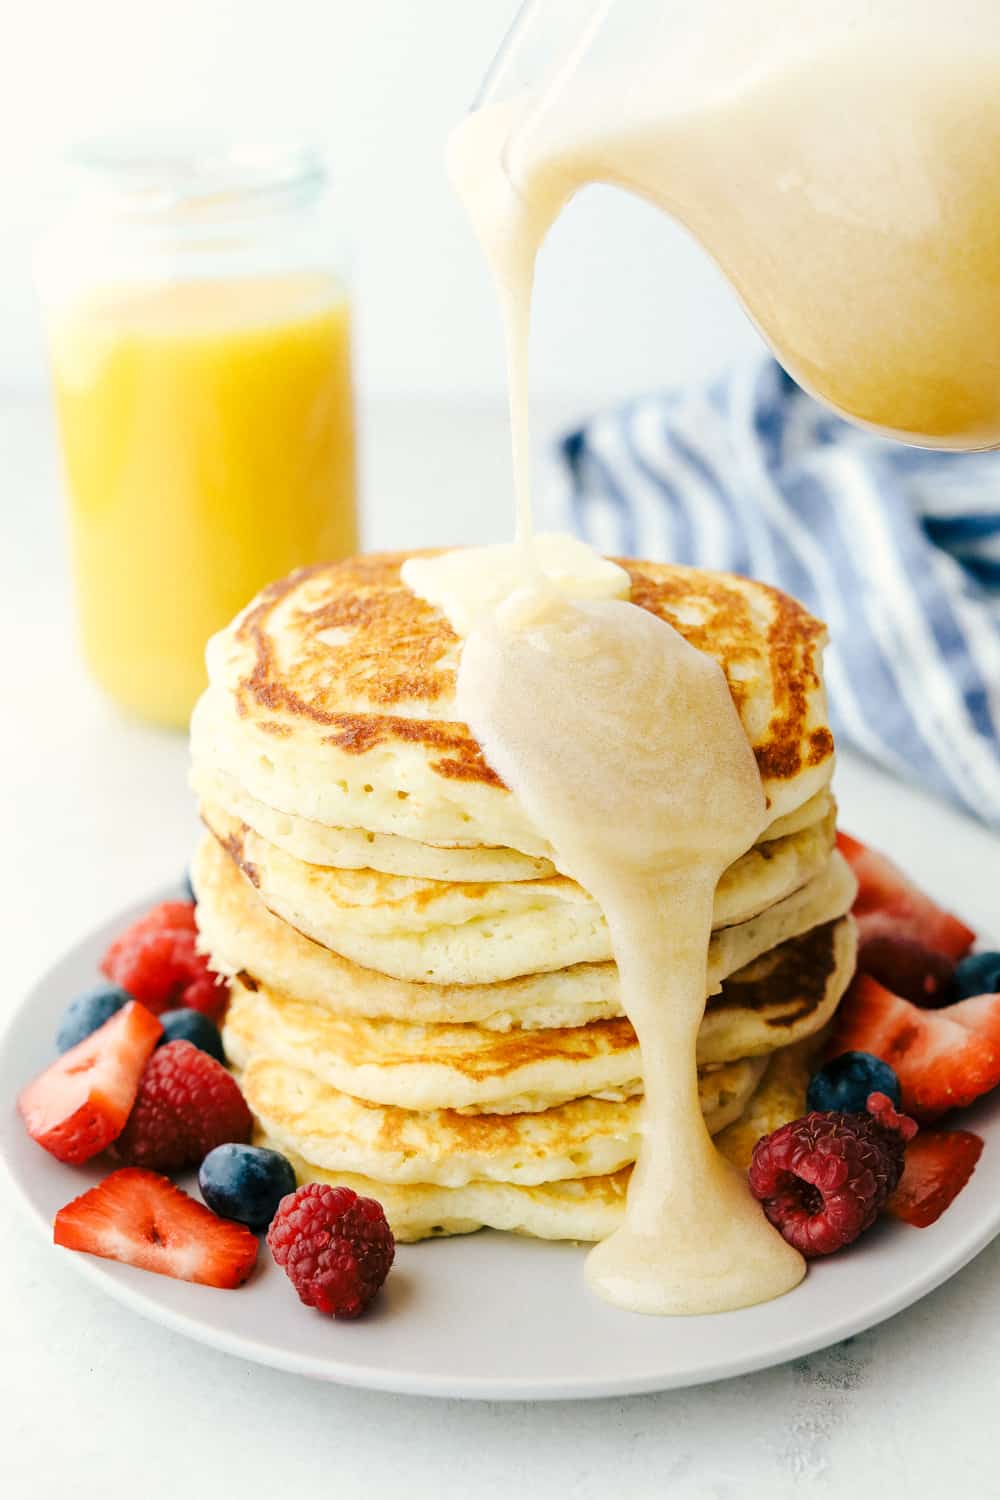 Creamy rich and decadent buttermilk syrup on pancakes. 